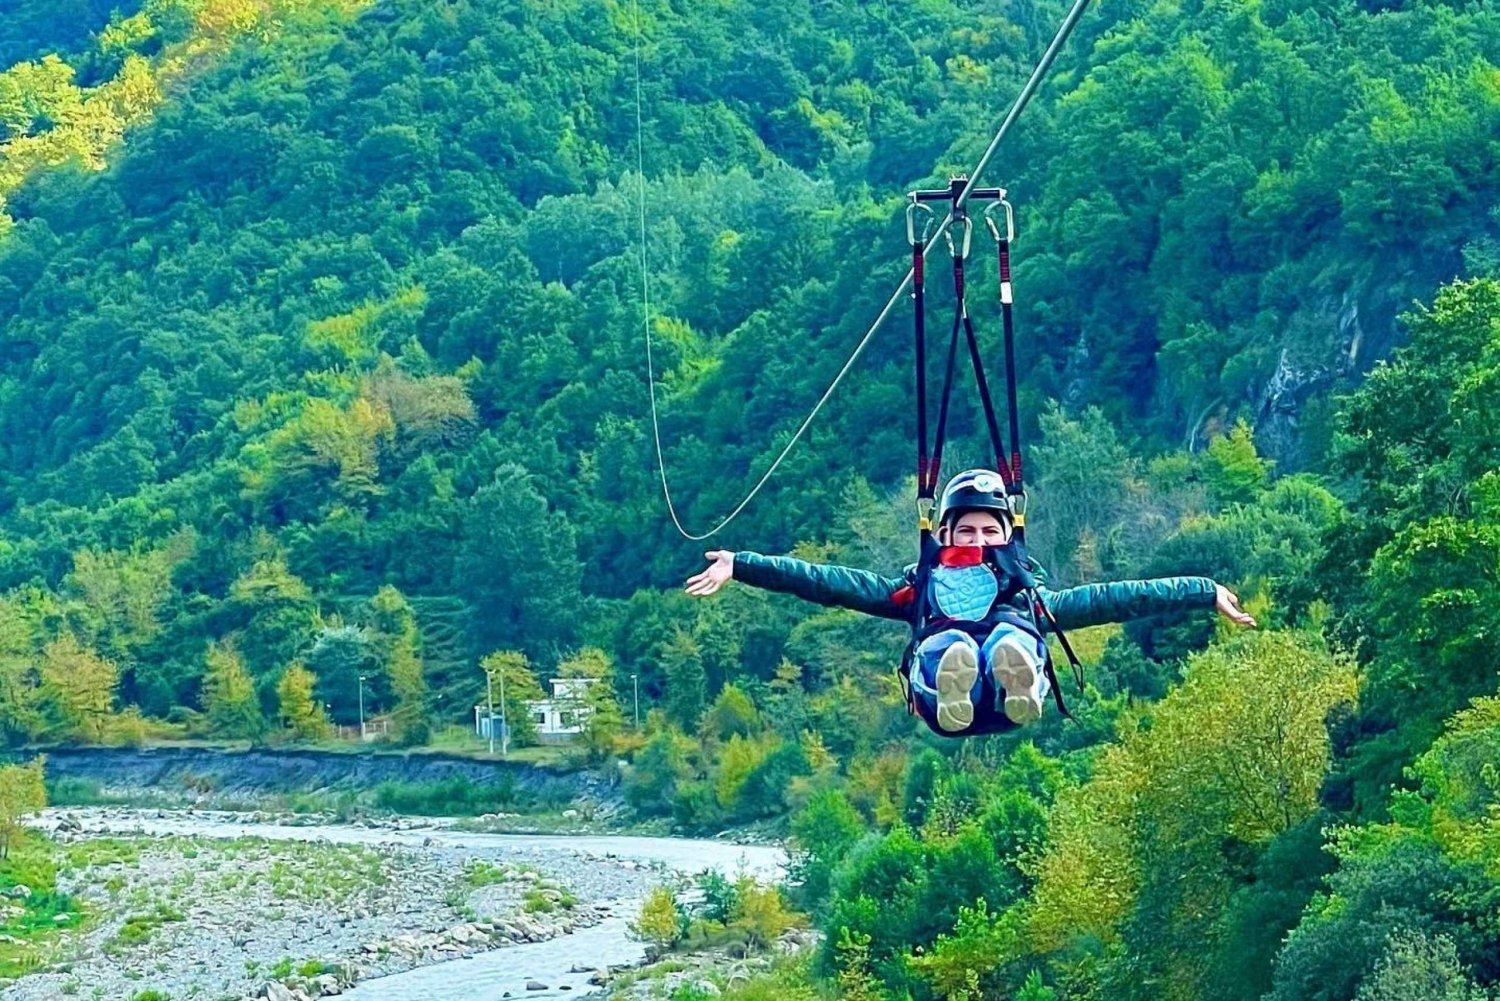 ZIP LINE Experience and Petrela Castle - (Service Fee Only)